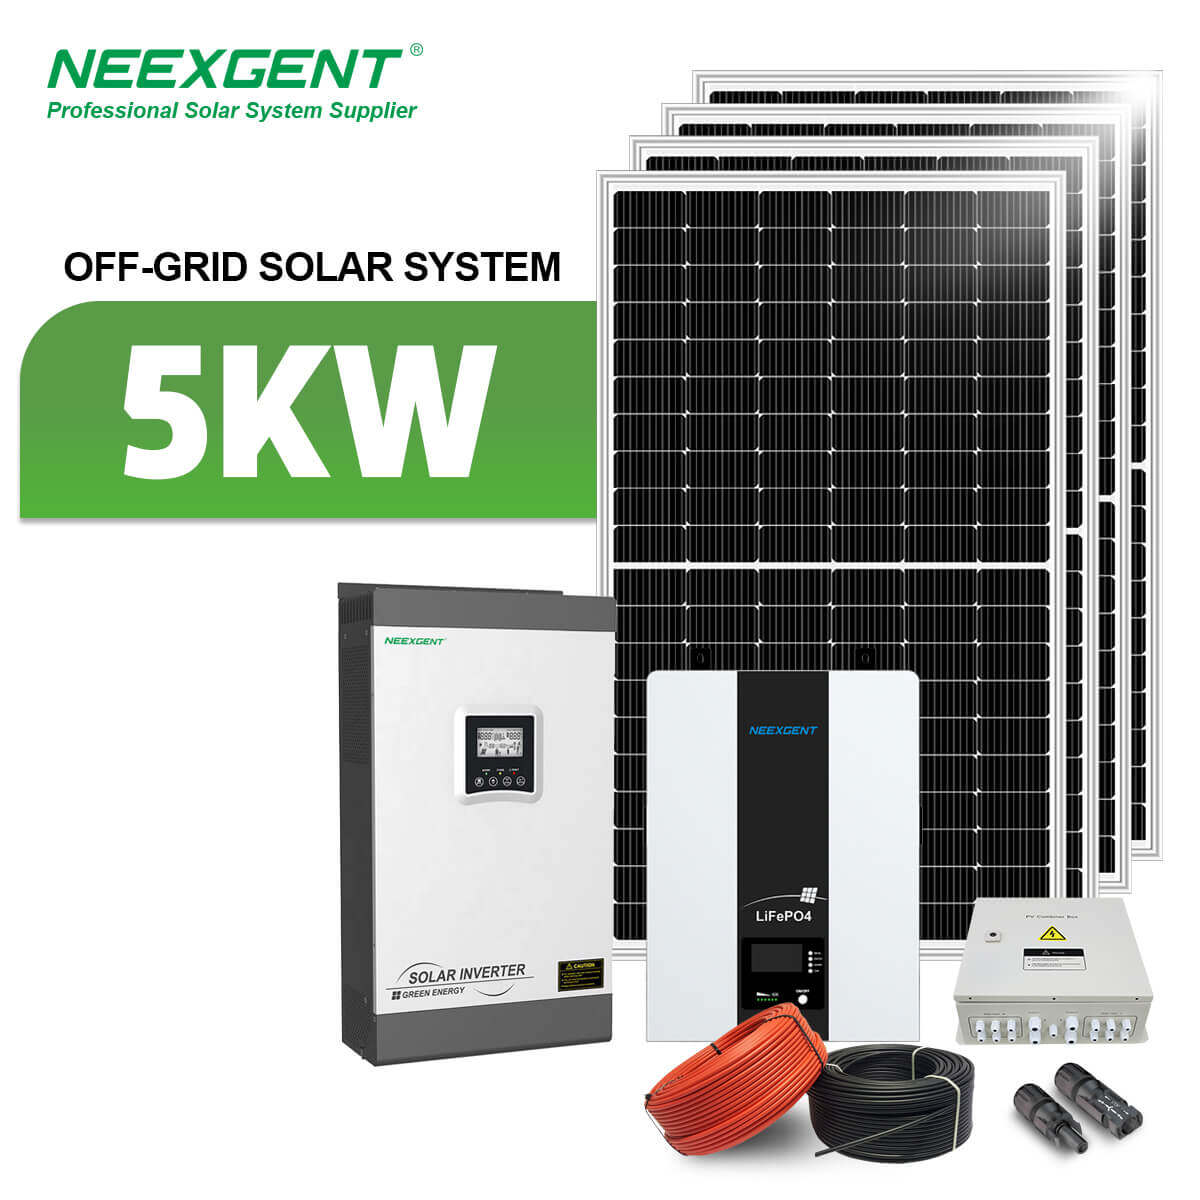 Neexgent PV System Off Gird Solar Panel System 5kw Complete Solar System Off Grid